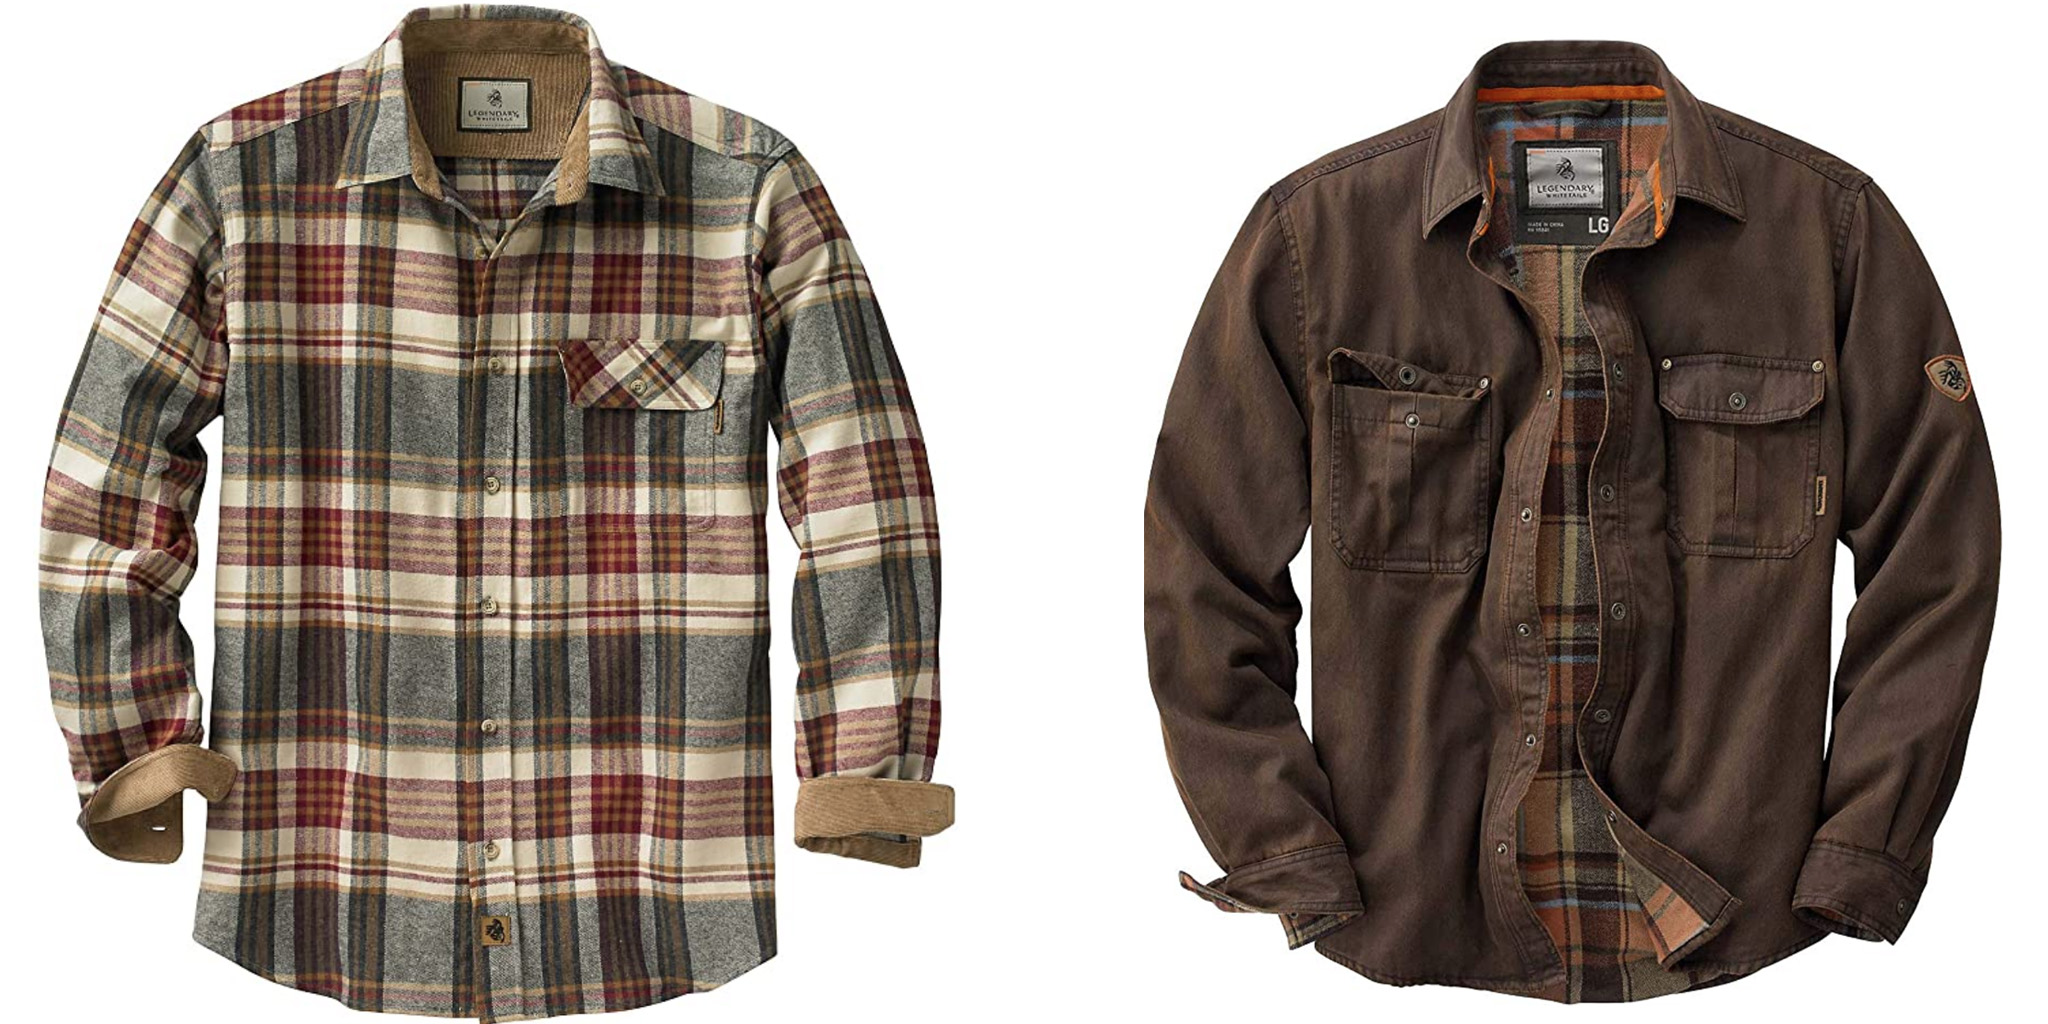 Flannel shirts, jackets, more from $20 Prime shipped at Amazon, today only